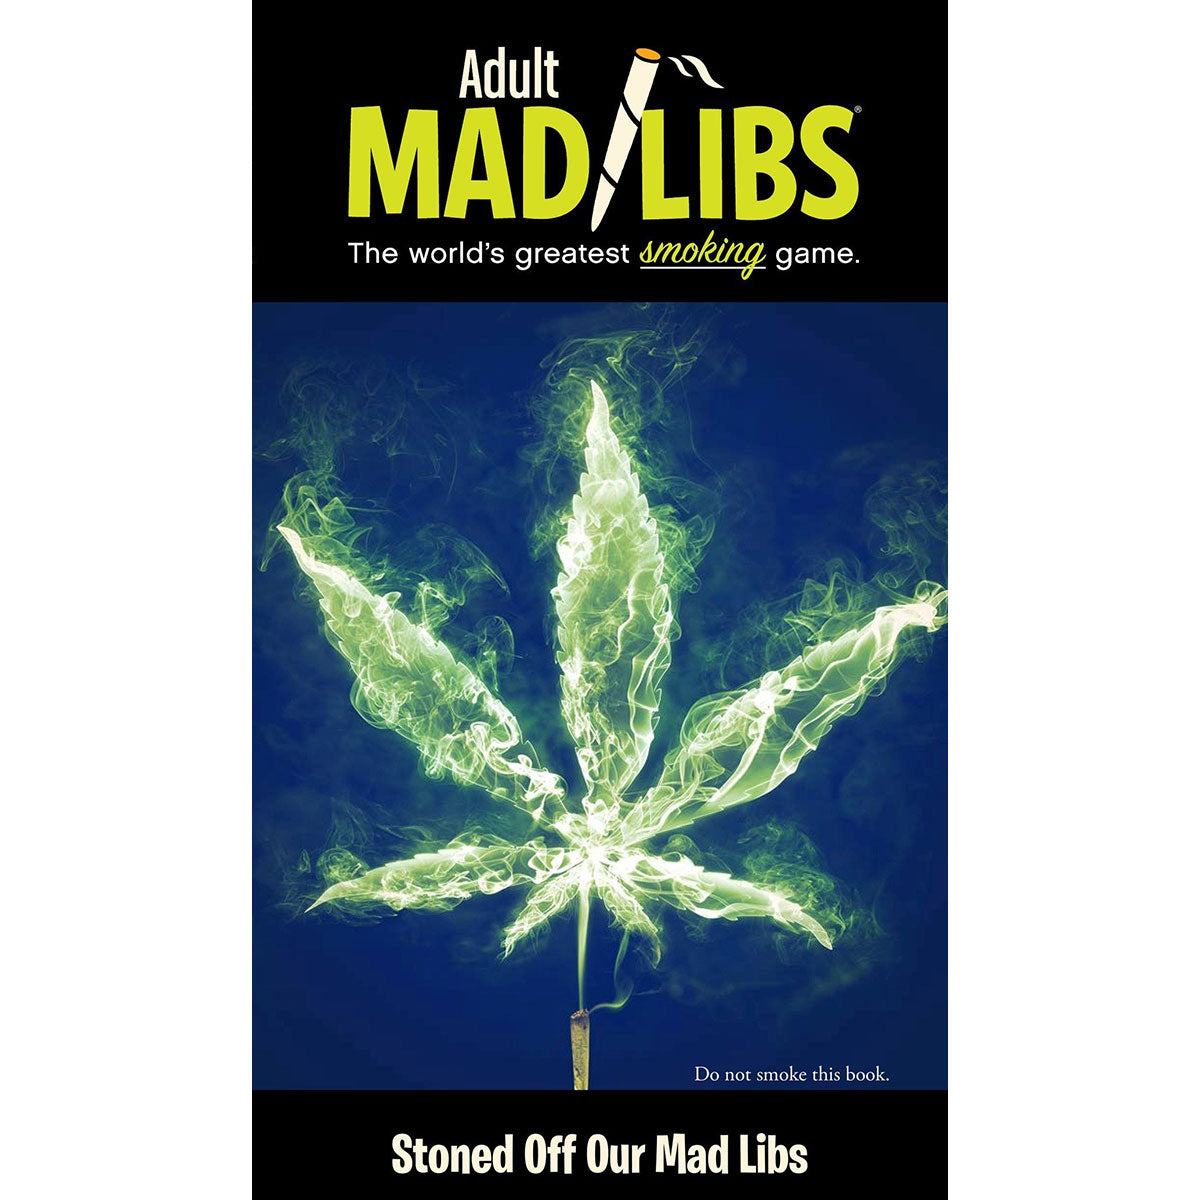 Stoned Off of Our Mad Libs